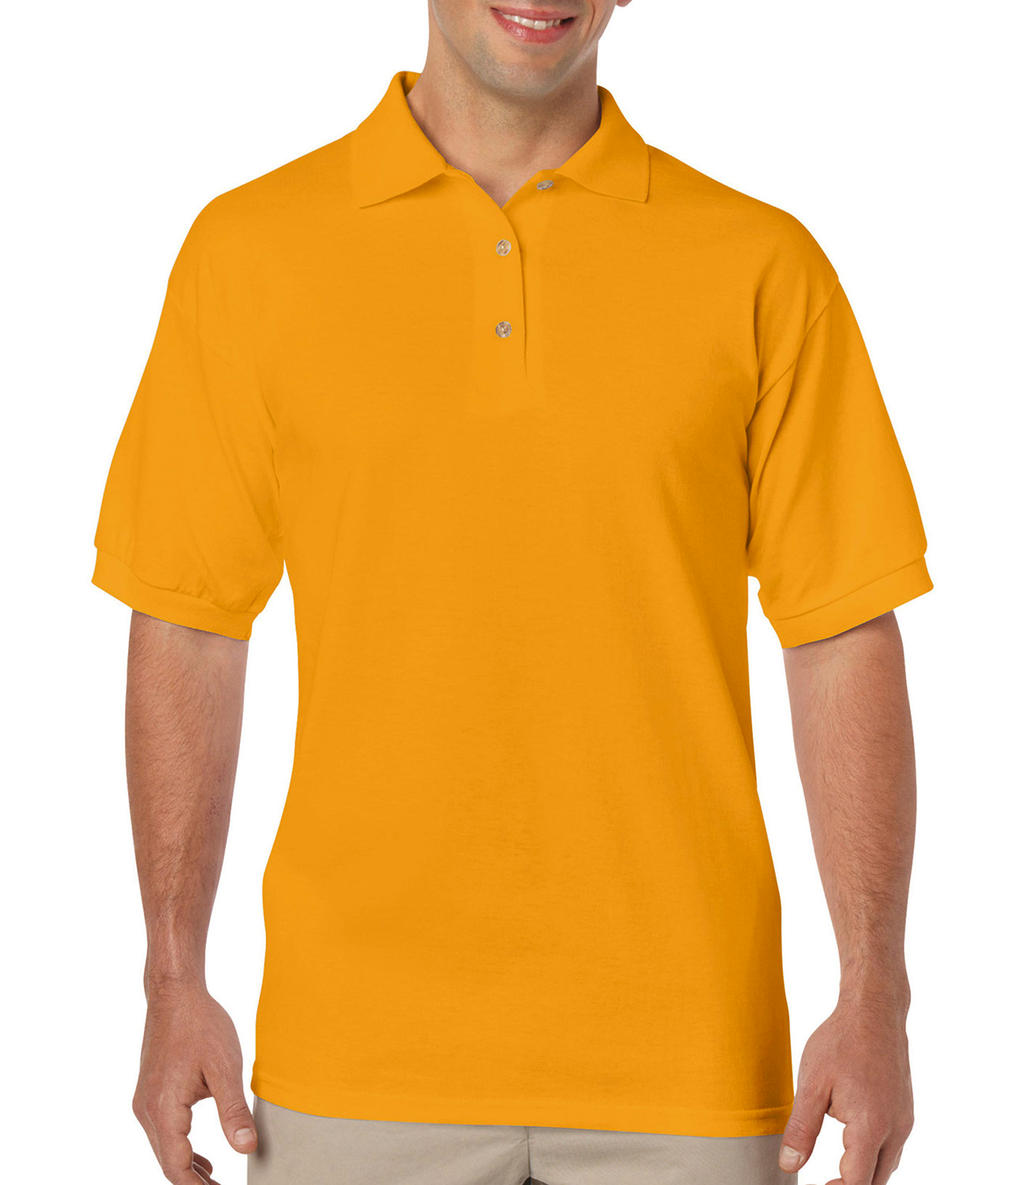  DryBlend Adult Jersey Polo in Farbe Gold